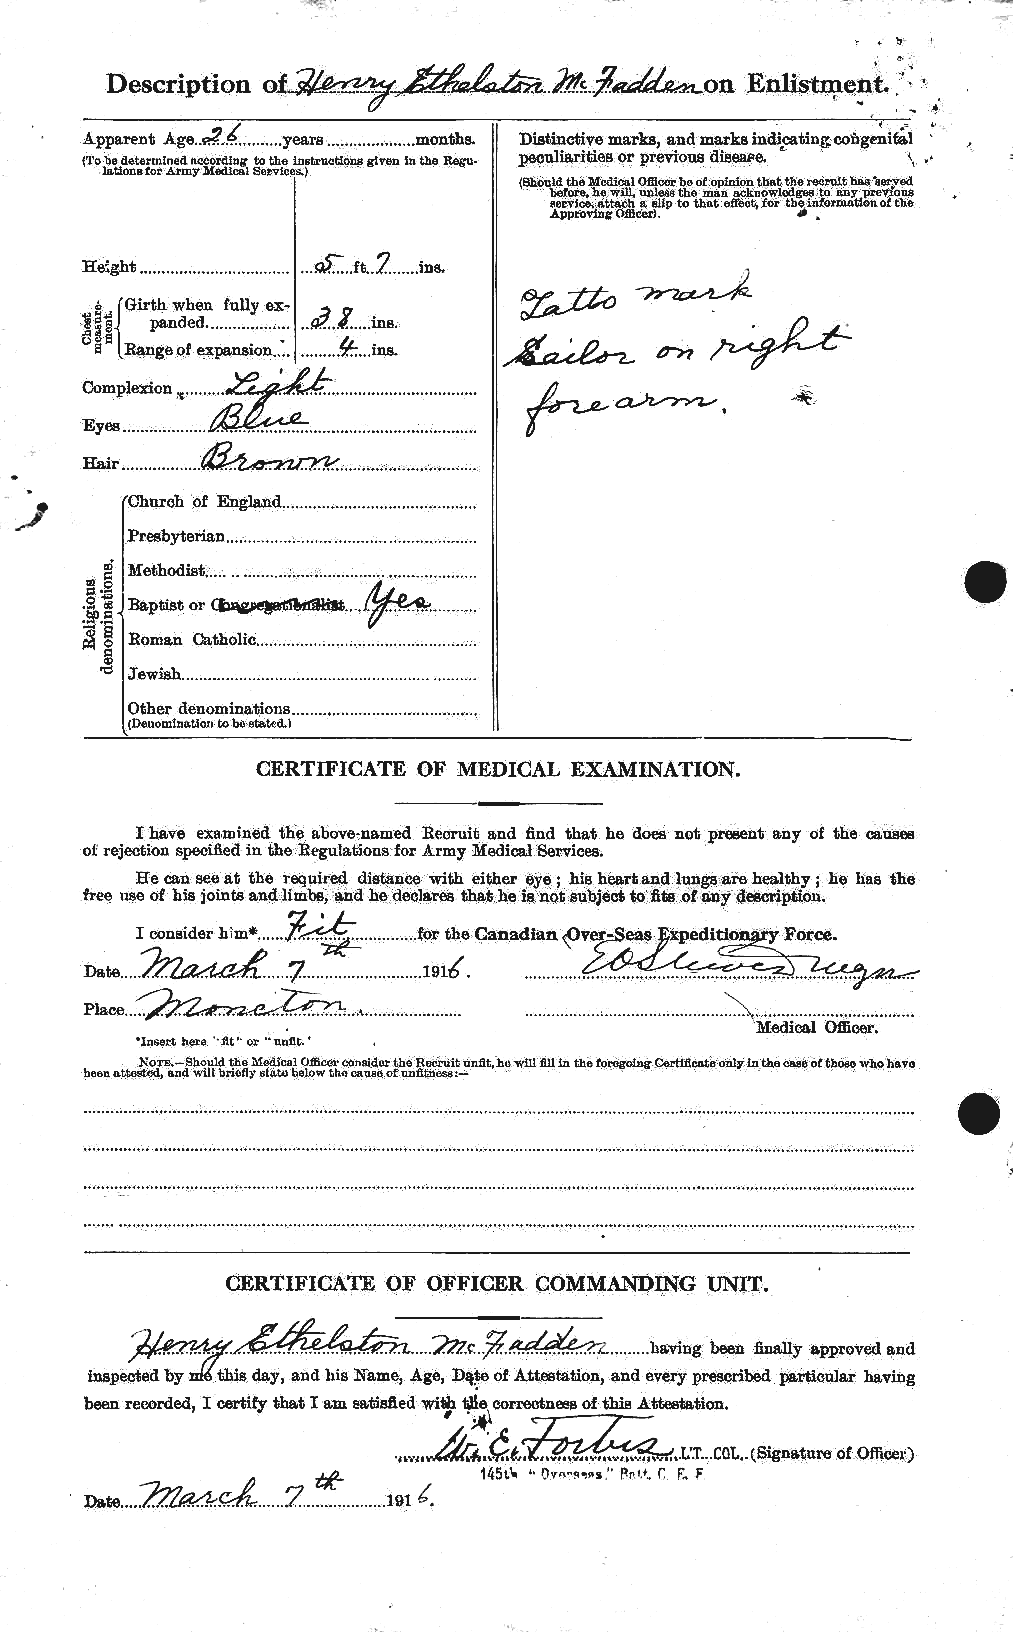 Personnel Records of the First World War - CEF 521064b